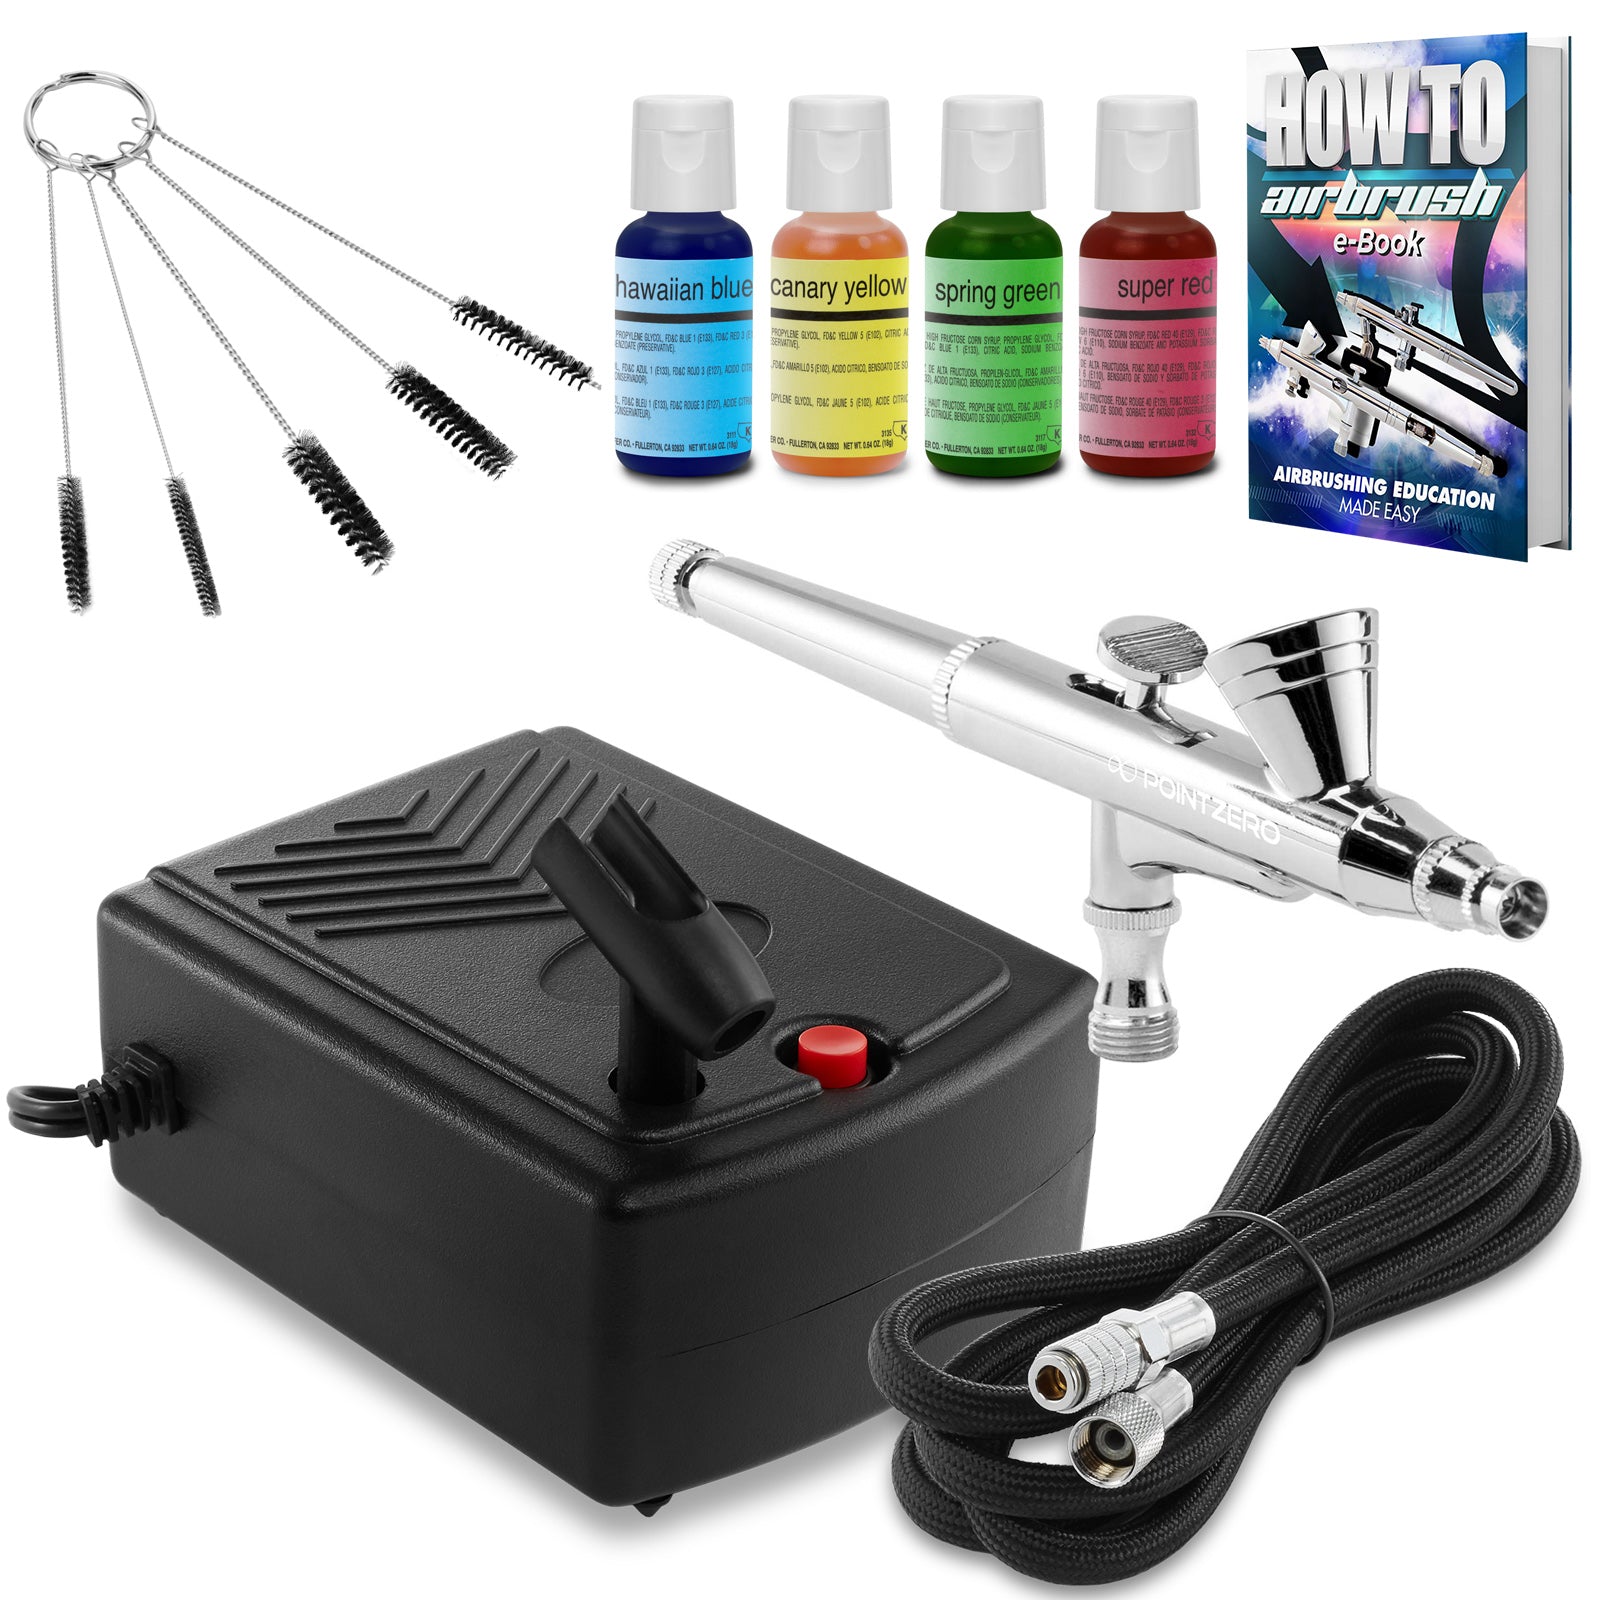 Super Deluxe Cake Decorating Airbrushing Kit 2 Airbrushes 12 Chefmaster Food Colors Air Compressor